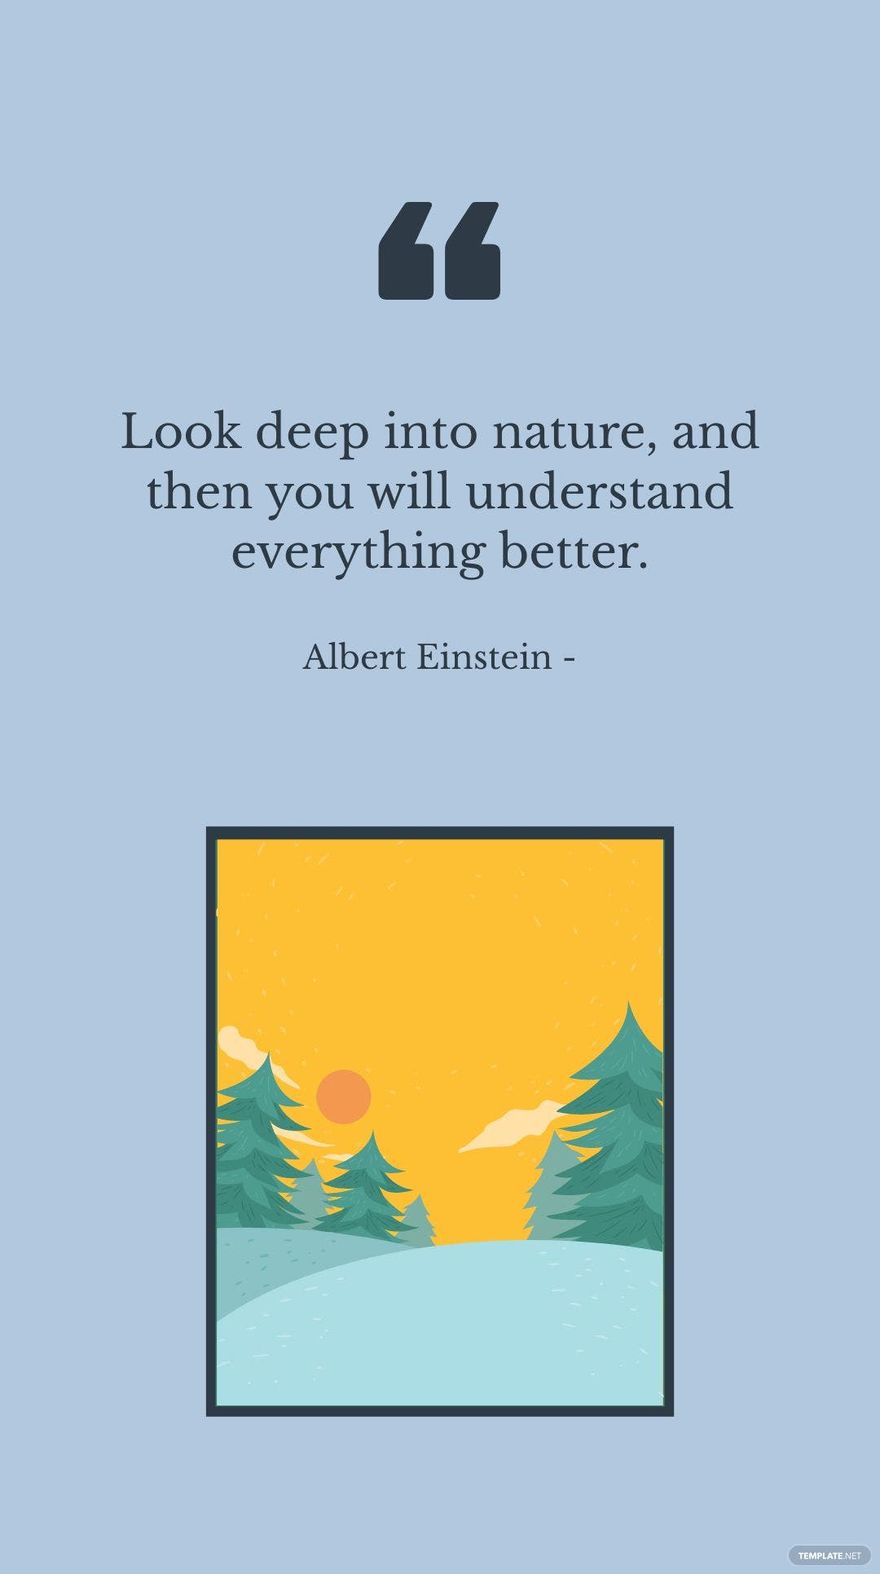 Albert Einstein - Look deep into nature, and then you will understand everything better.